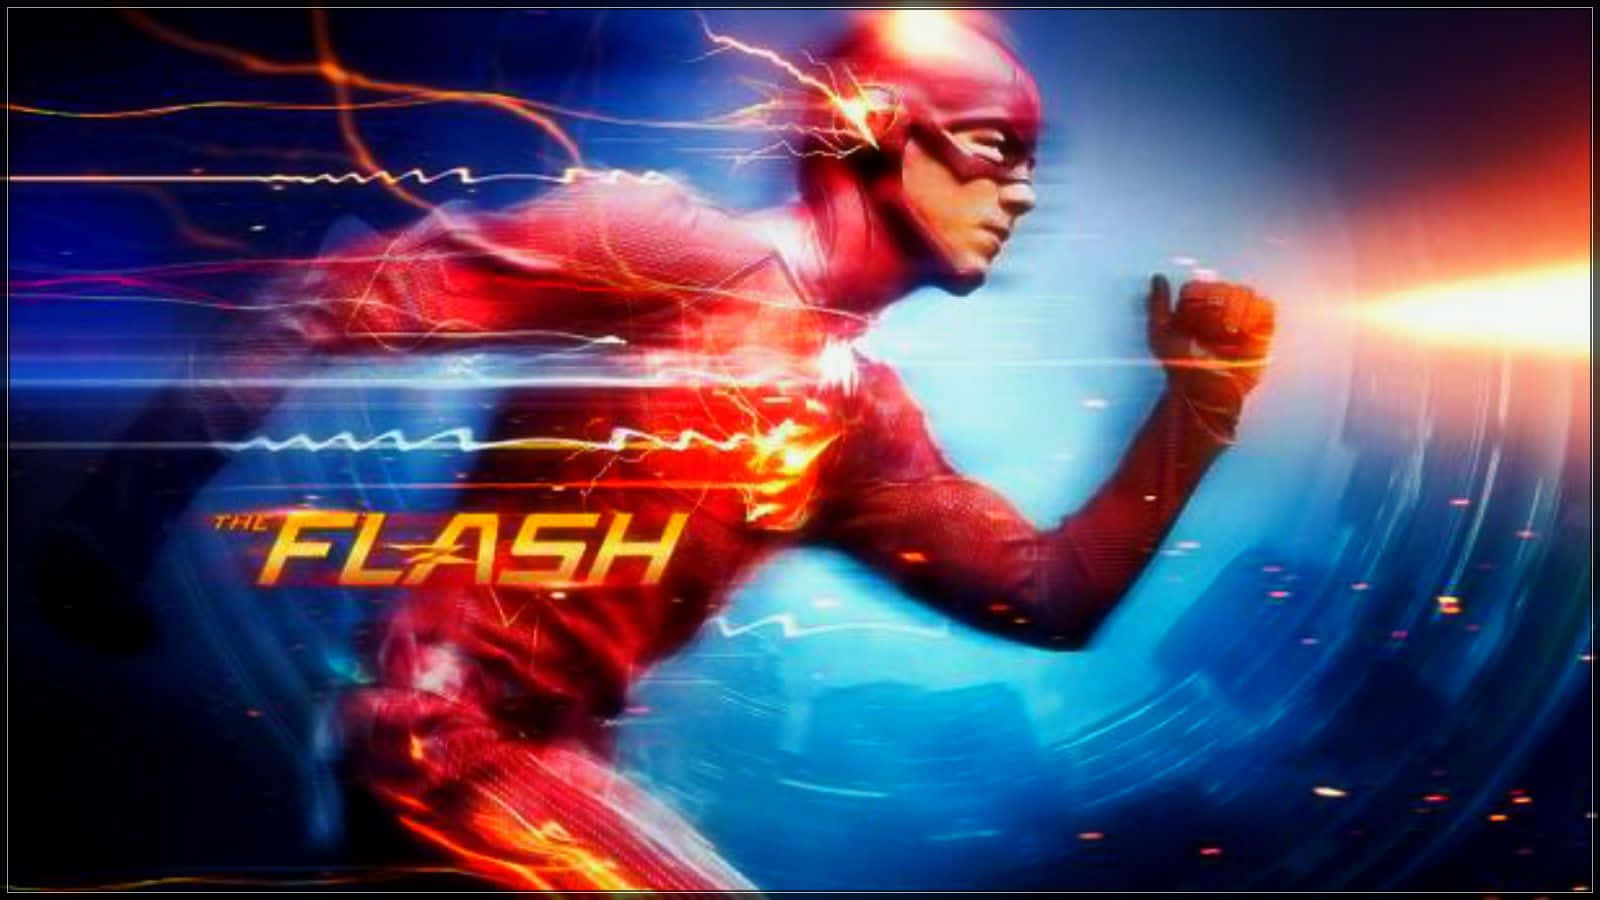 Sprint of Light - The Flash in Action Wallpaper